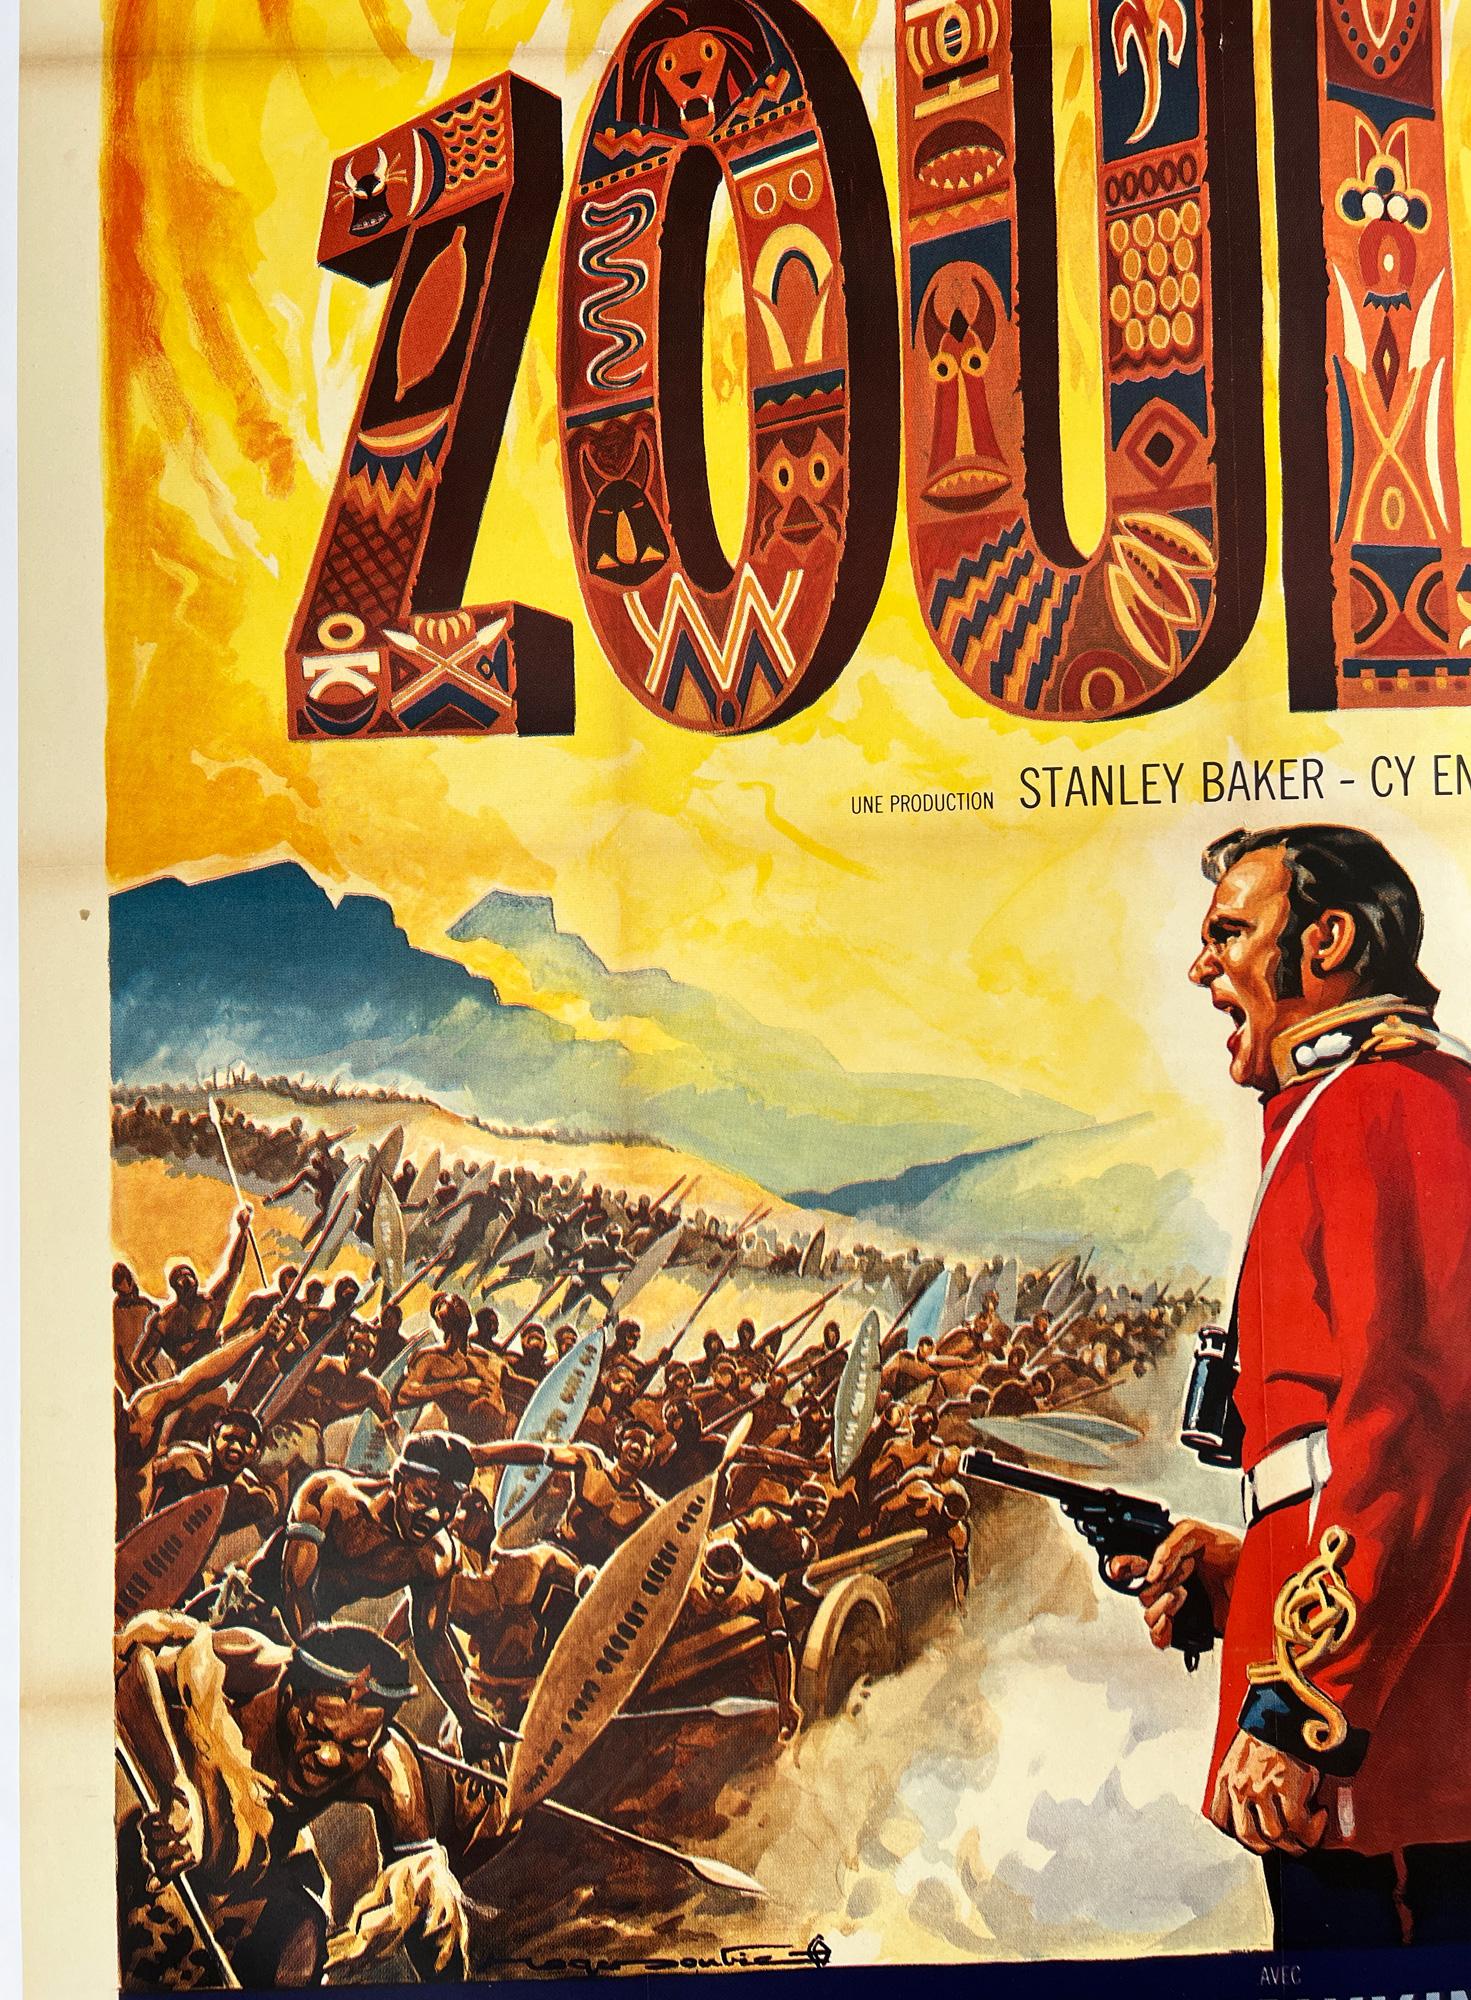 Zulu 1964 French Grande Film Poster. Roger Soubie In Excellent Condition For Sale In Bath, Somerset